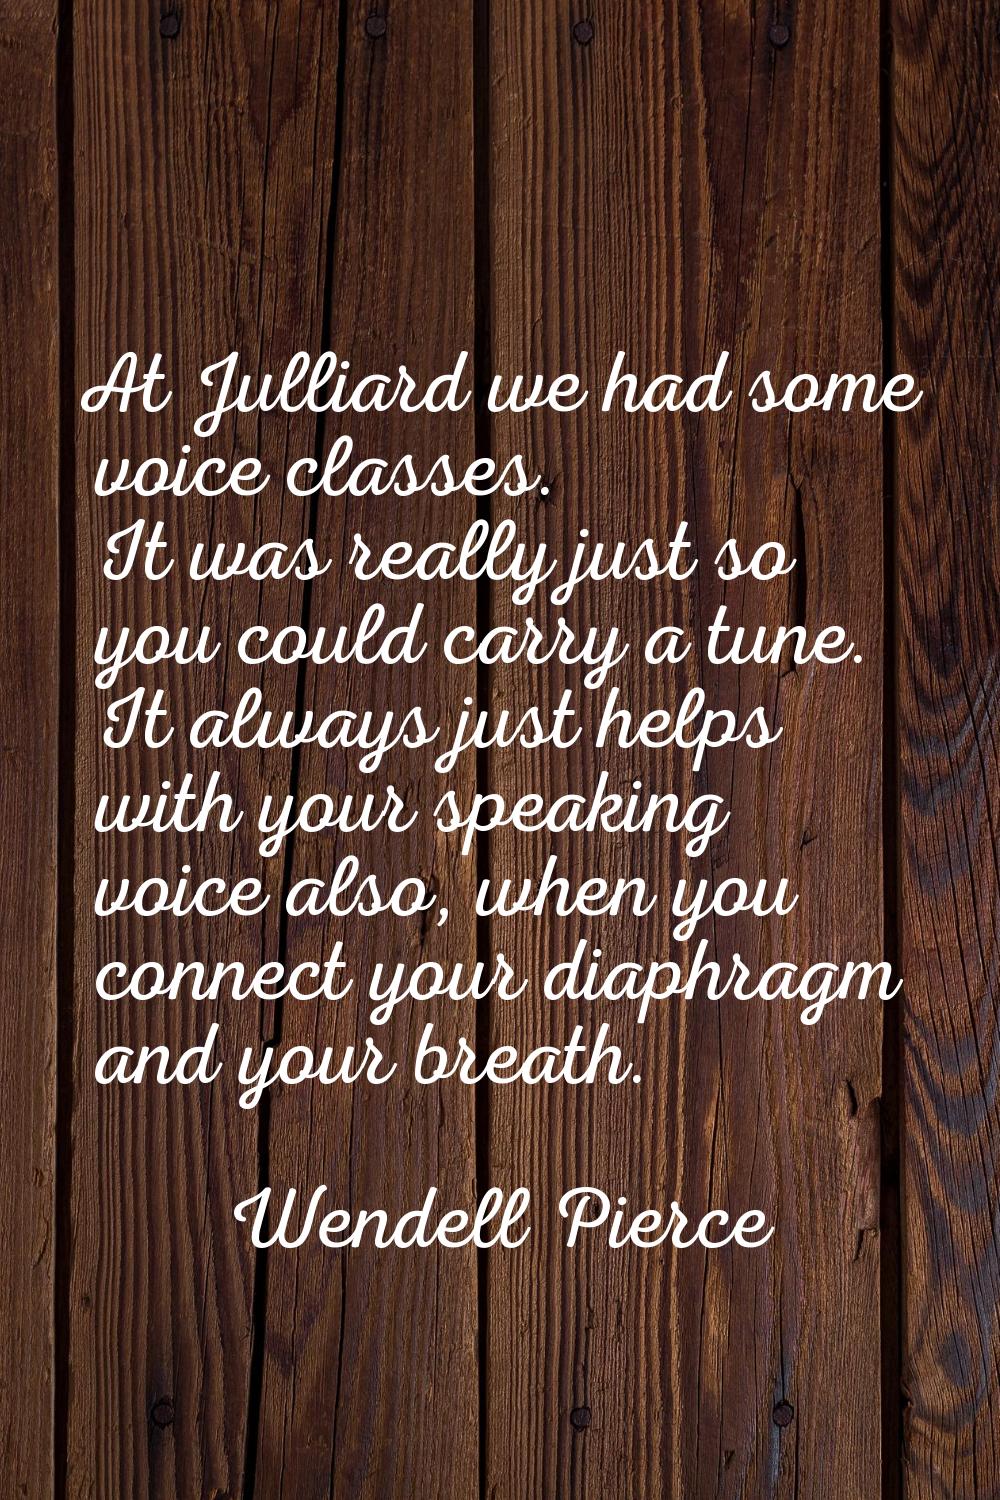 At Julliard we had some voice classes. It was really just so you could carry a tune. It always just